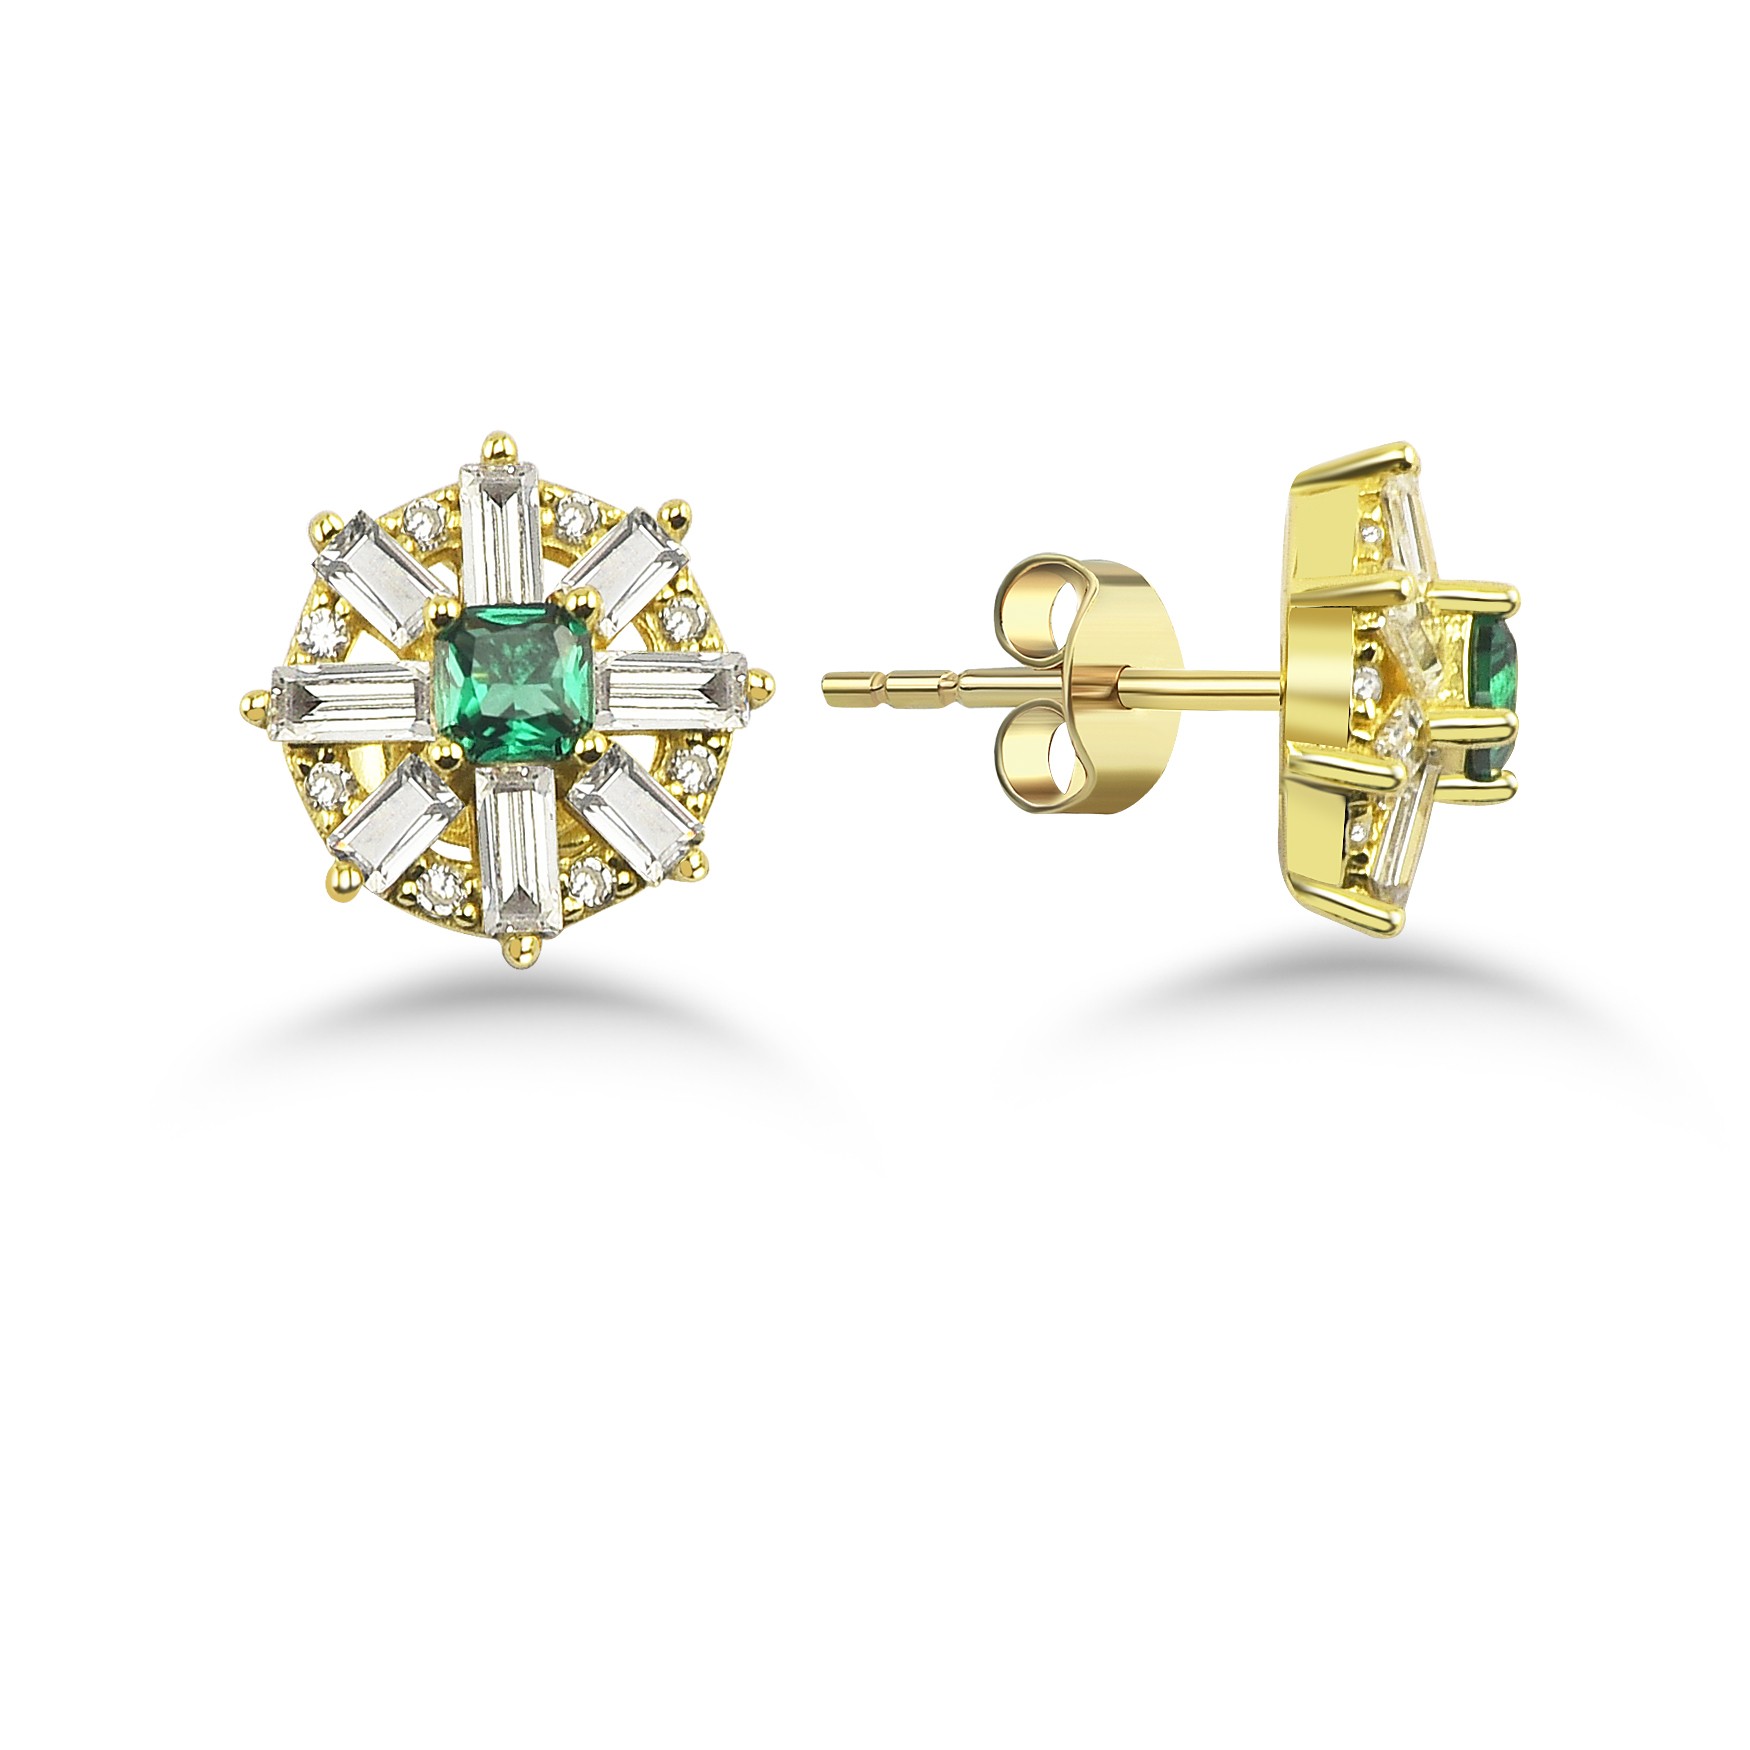 Emerald and Baguette Earrings - Gold